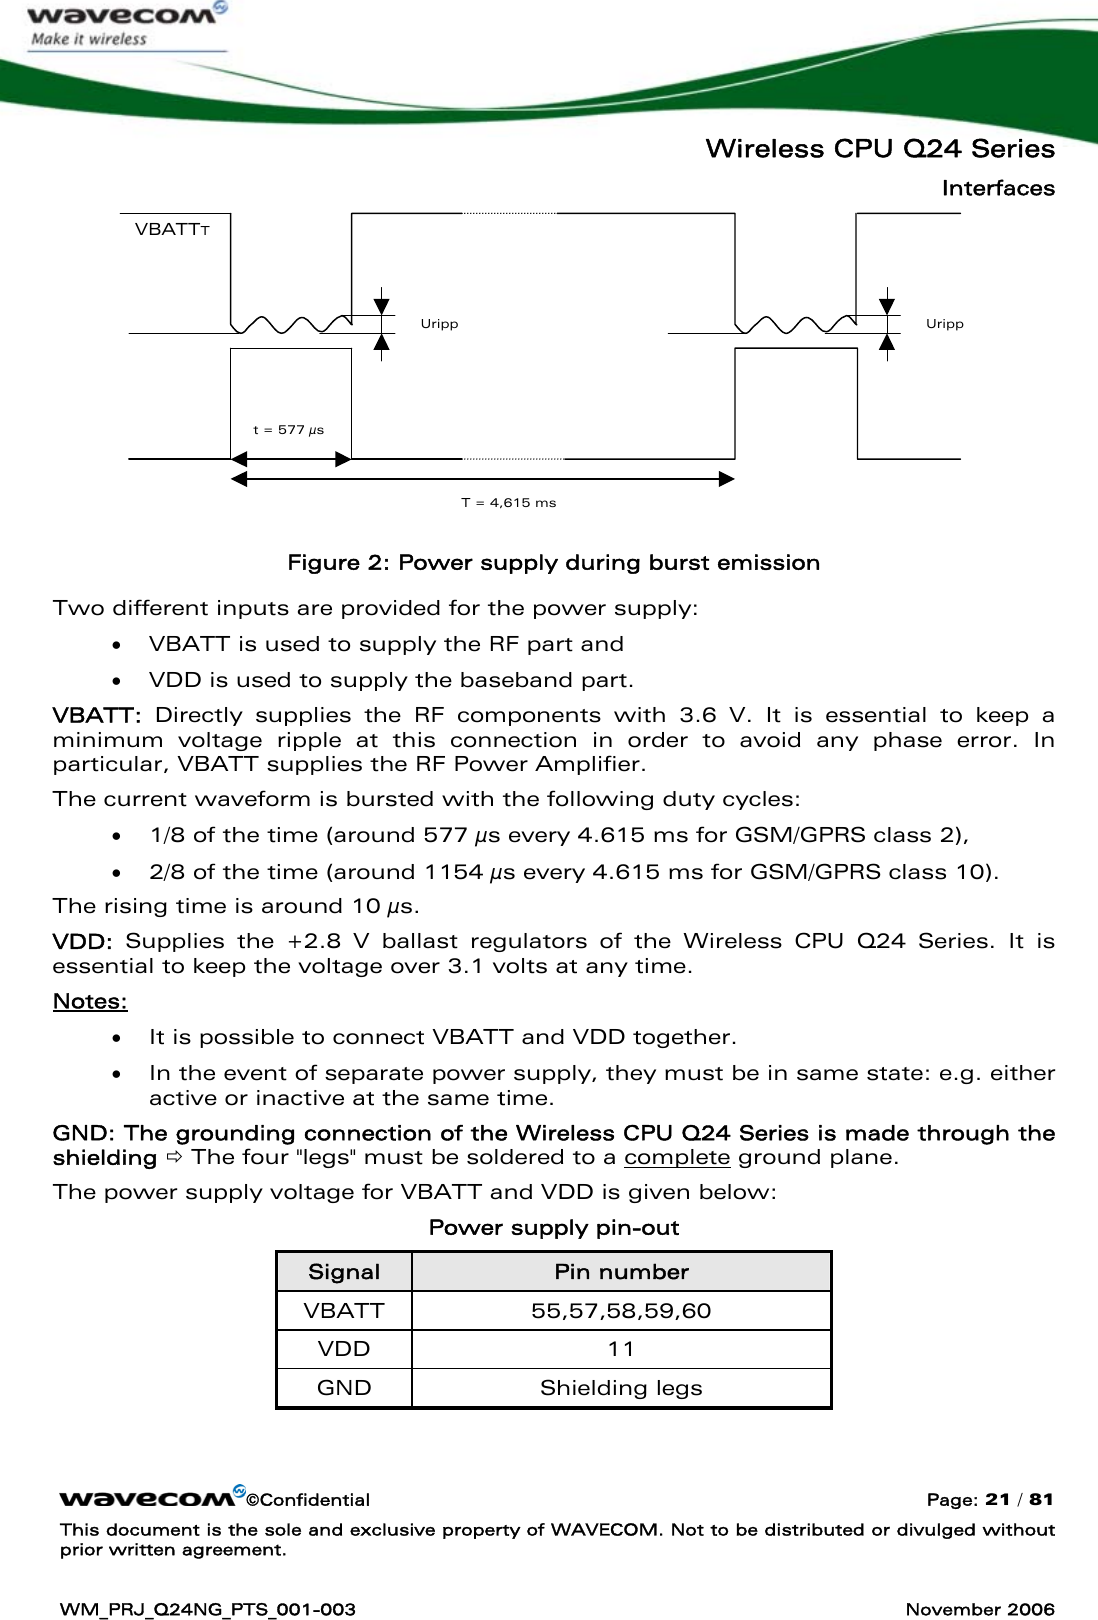   Wireless CPU Q24 Series Interfaces ©Confidential  Page: 21 / 81 This document is the sole and exclusive property of WAVECOM. Not to be distributed or divulged without prior written agreement.  WM_PRJ_Q24NG_PTS_001-003  November 2006   Uripp VBATTT Uripp  T = 4,615 ms t = 577 μs  Figure 2: Power supply during burst emission Two different inputs are provided for the power supply: • VBATT is used to supply the RF part and • VDD is used to supply the baseband part. VBATT:  Directly supplies the RF components with 3.6 V. It is essential to keep a minimum voltage ripple at this connection in order to avoid any phase error. In particular, VBATT supplies the RF Power Amplifier. The current waveform is bursted with the following duty cycles: • 1/8 of the time (around 577 μs every 4.615 ms for GSM/GPRS class 2), • 2/8 of the time (around 1154 μs every 4.615 ms for GSM/GPRS class 10). The rising time is around 10 μs. VDD: Supplies the +2.8 V ballast regulators of the Wireless CPU Q24 Series. It is essential to keep the voltage over 3.1 volts at any time.  Notes: • It is possible to connect VBATT and VDD together. • In the event of separate power supply, they must be in same state: e.g. either active or inactive at the same time. GND: The grounding connection of the Wireless CPU Q24 Series is made through the shielding Ö The four &quot;legs&quot; must be soldered to a complete ground plane. The power supply voltage for VBATT and VDD is given below: Power supply pin-out Signal  Pin number VBATT 55,57,58,59,60 VDD 11 GND Shielding legs  